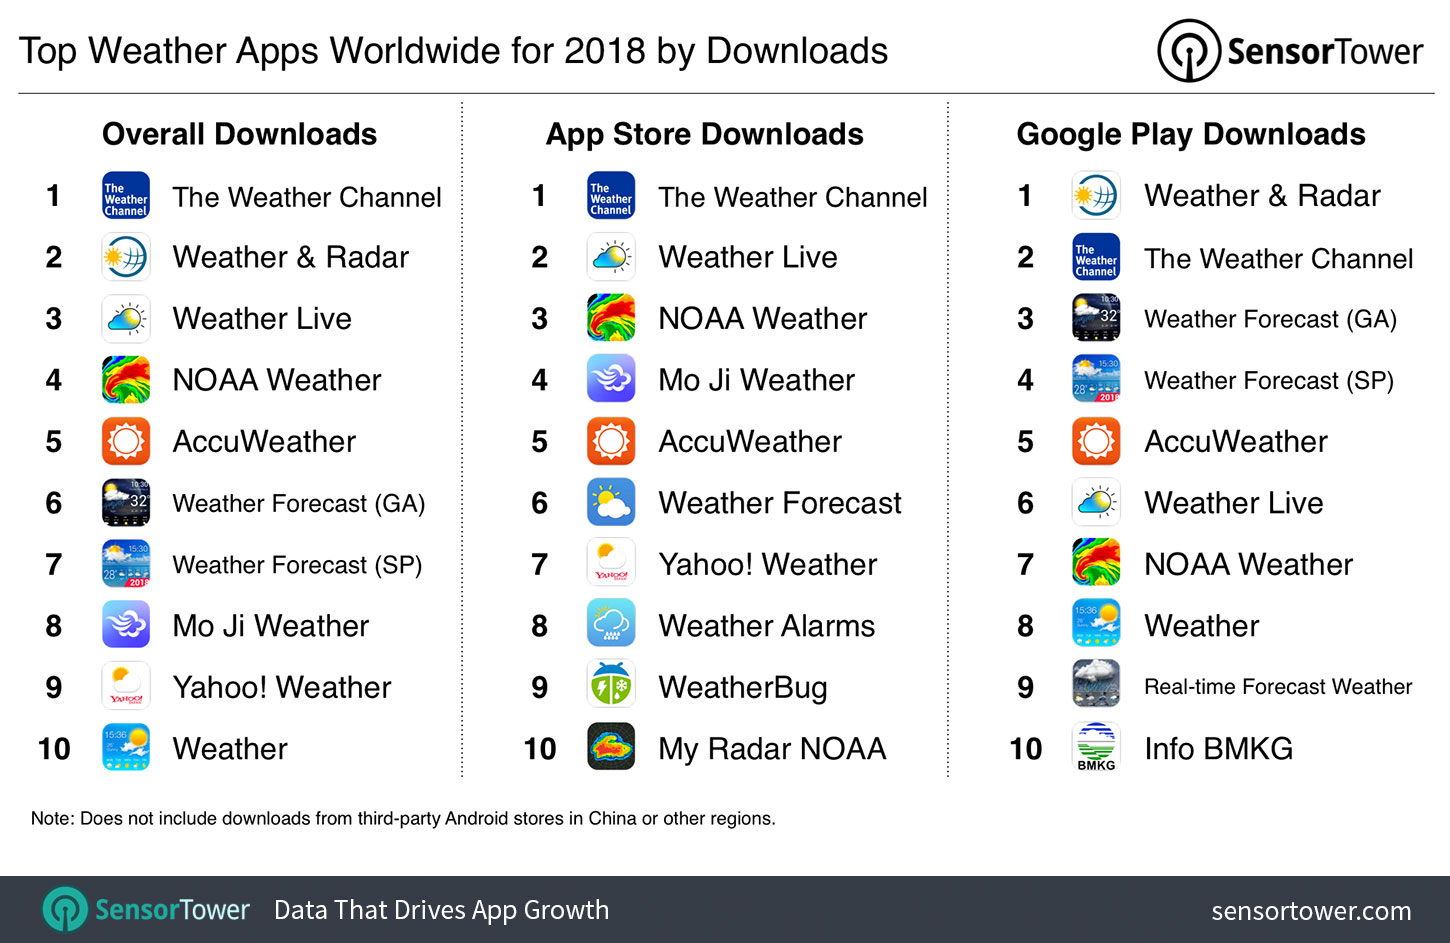 Top Weather Apps for 2018 Worldwide by Downloads